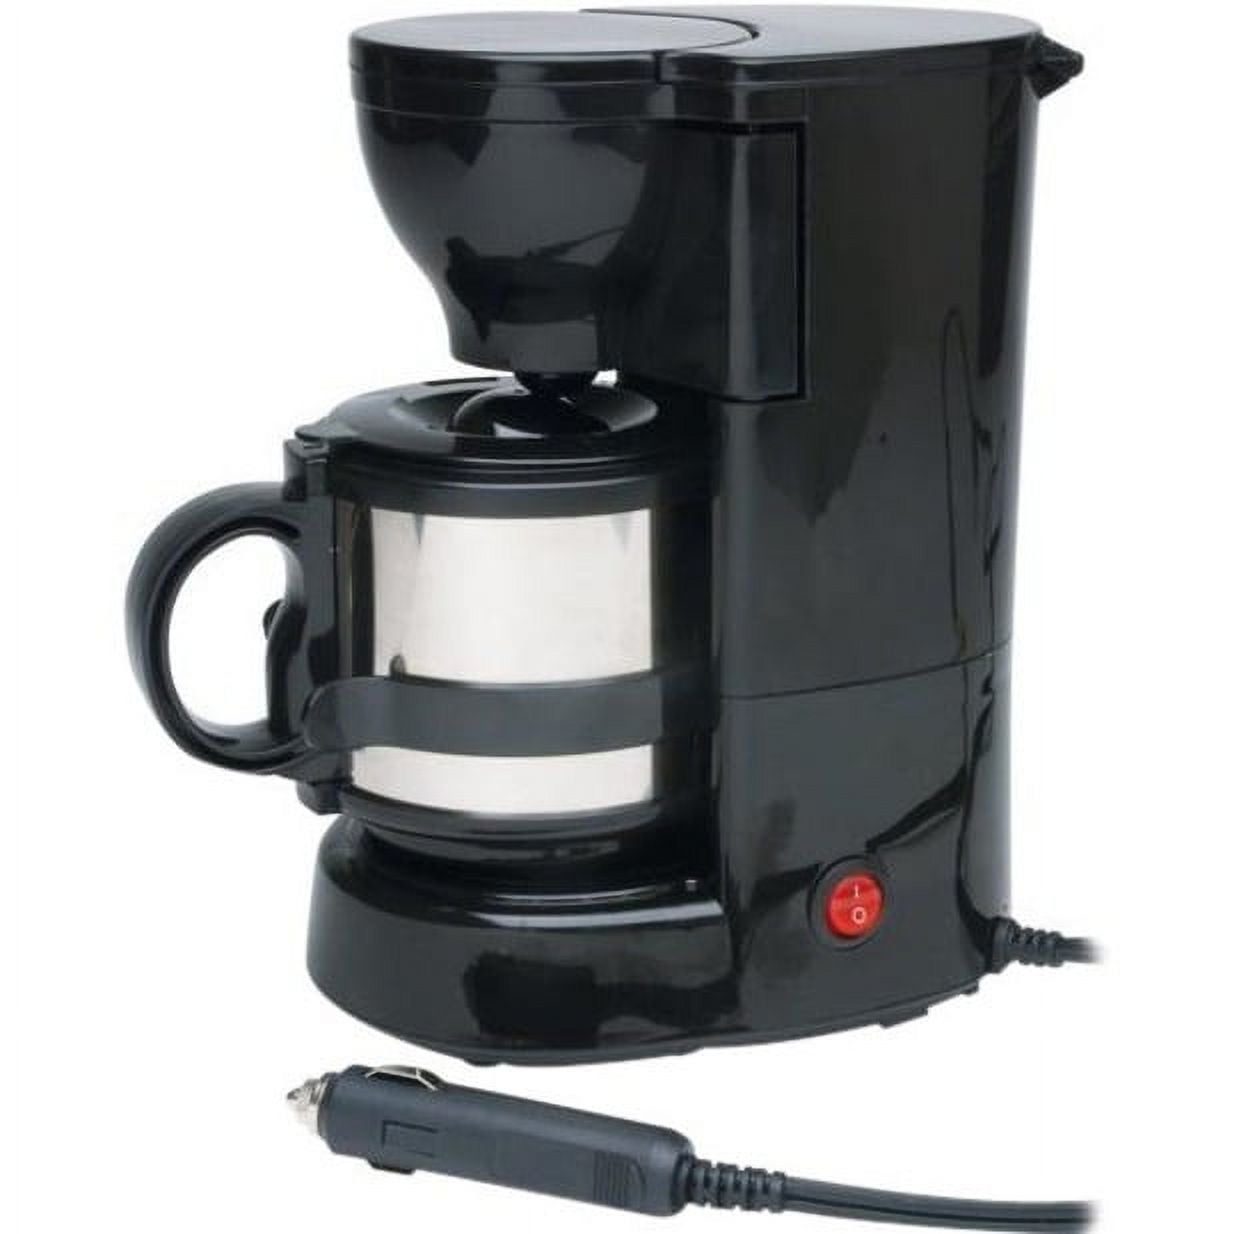 RoadPro 12-Volt Coffee Maker with Glass Carafe